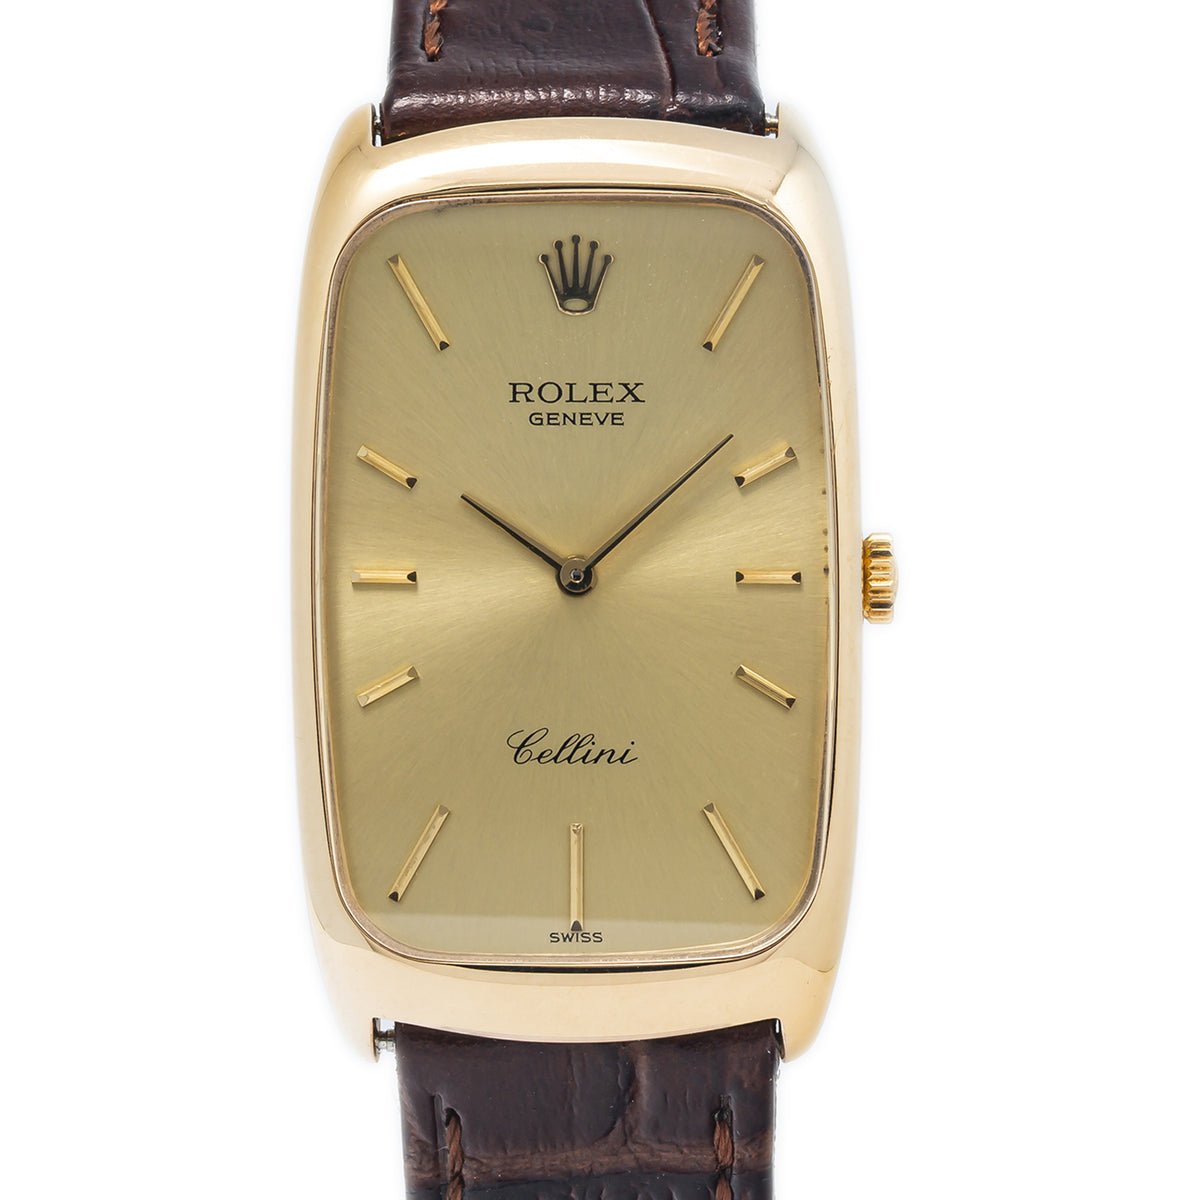 Rolex Cellini 4136 MINT 18k Yellow Gold Champagne Dial Manual Watch 25x41mm